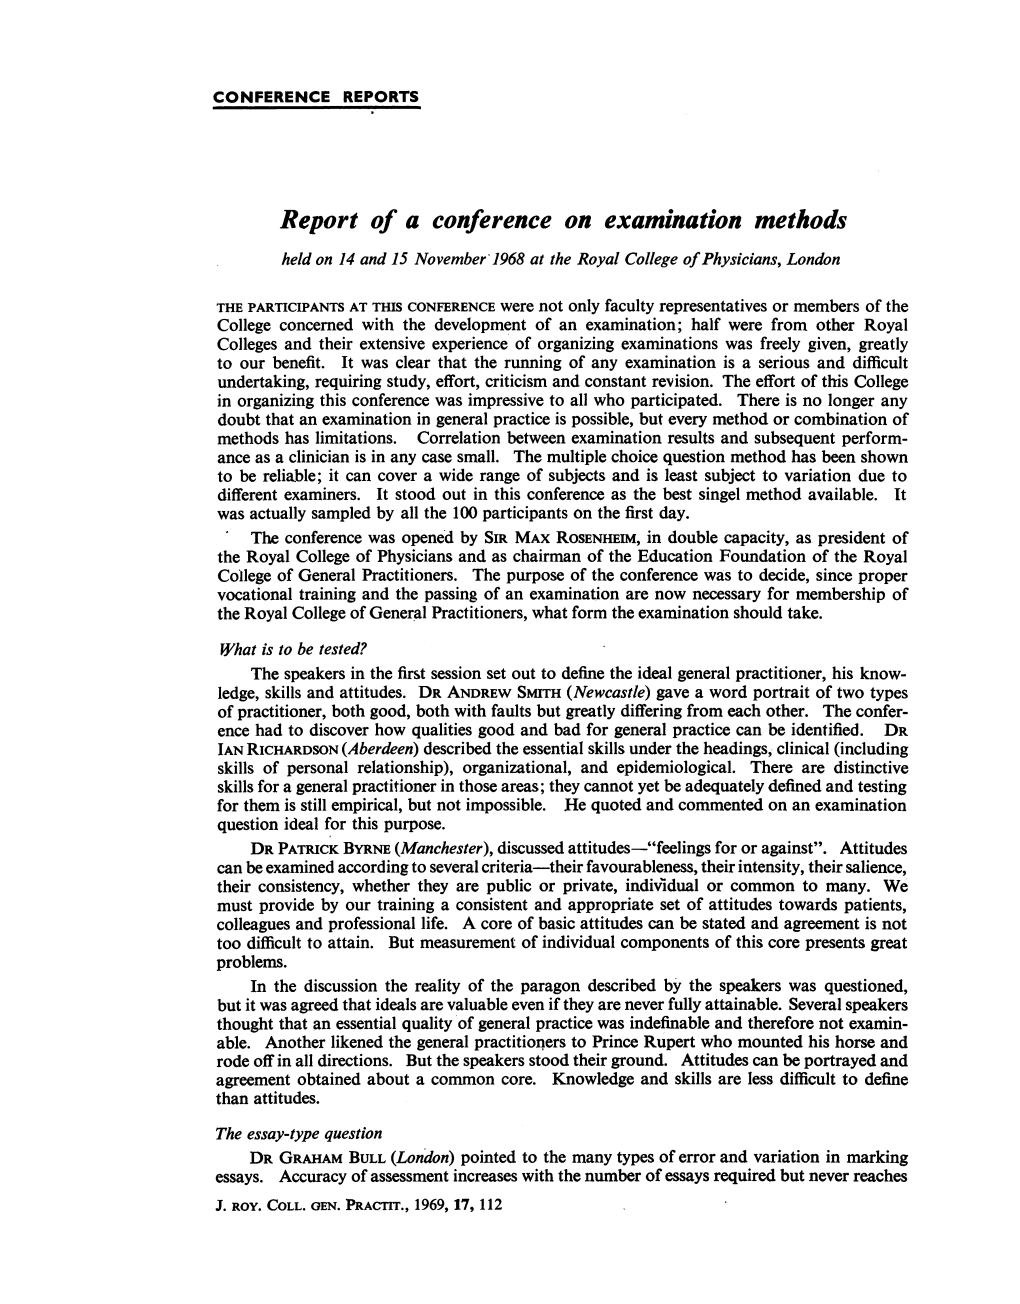 Report of a Conference on Examination Methods Held on 14 and 15 November' 1968 at the Royal College Ofphysicians, London